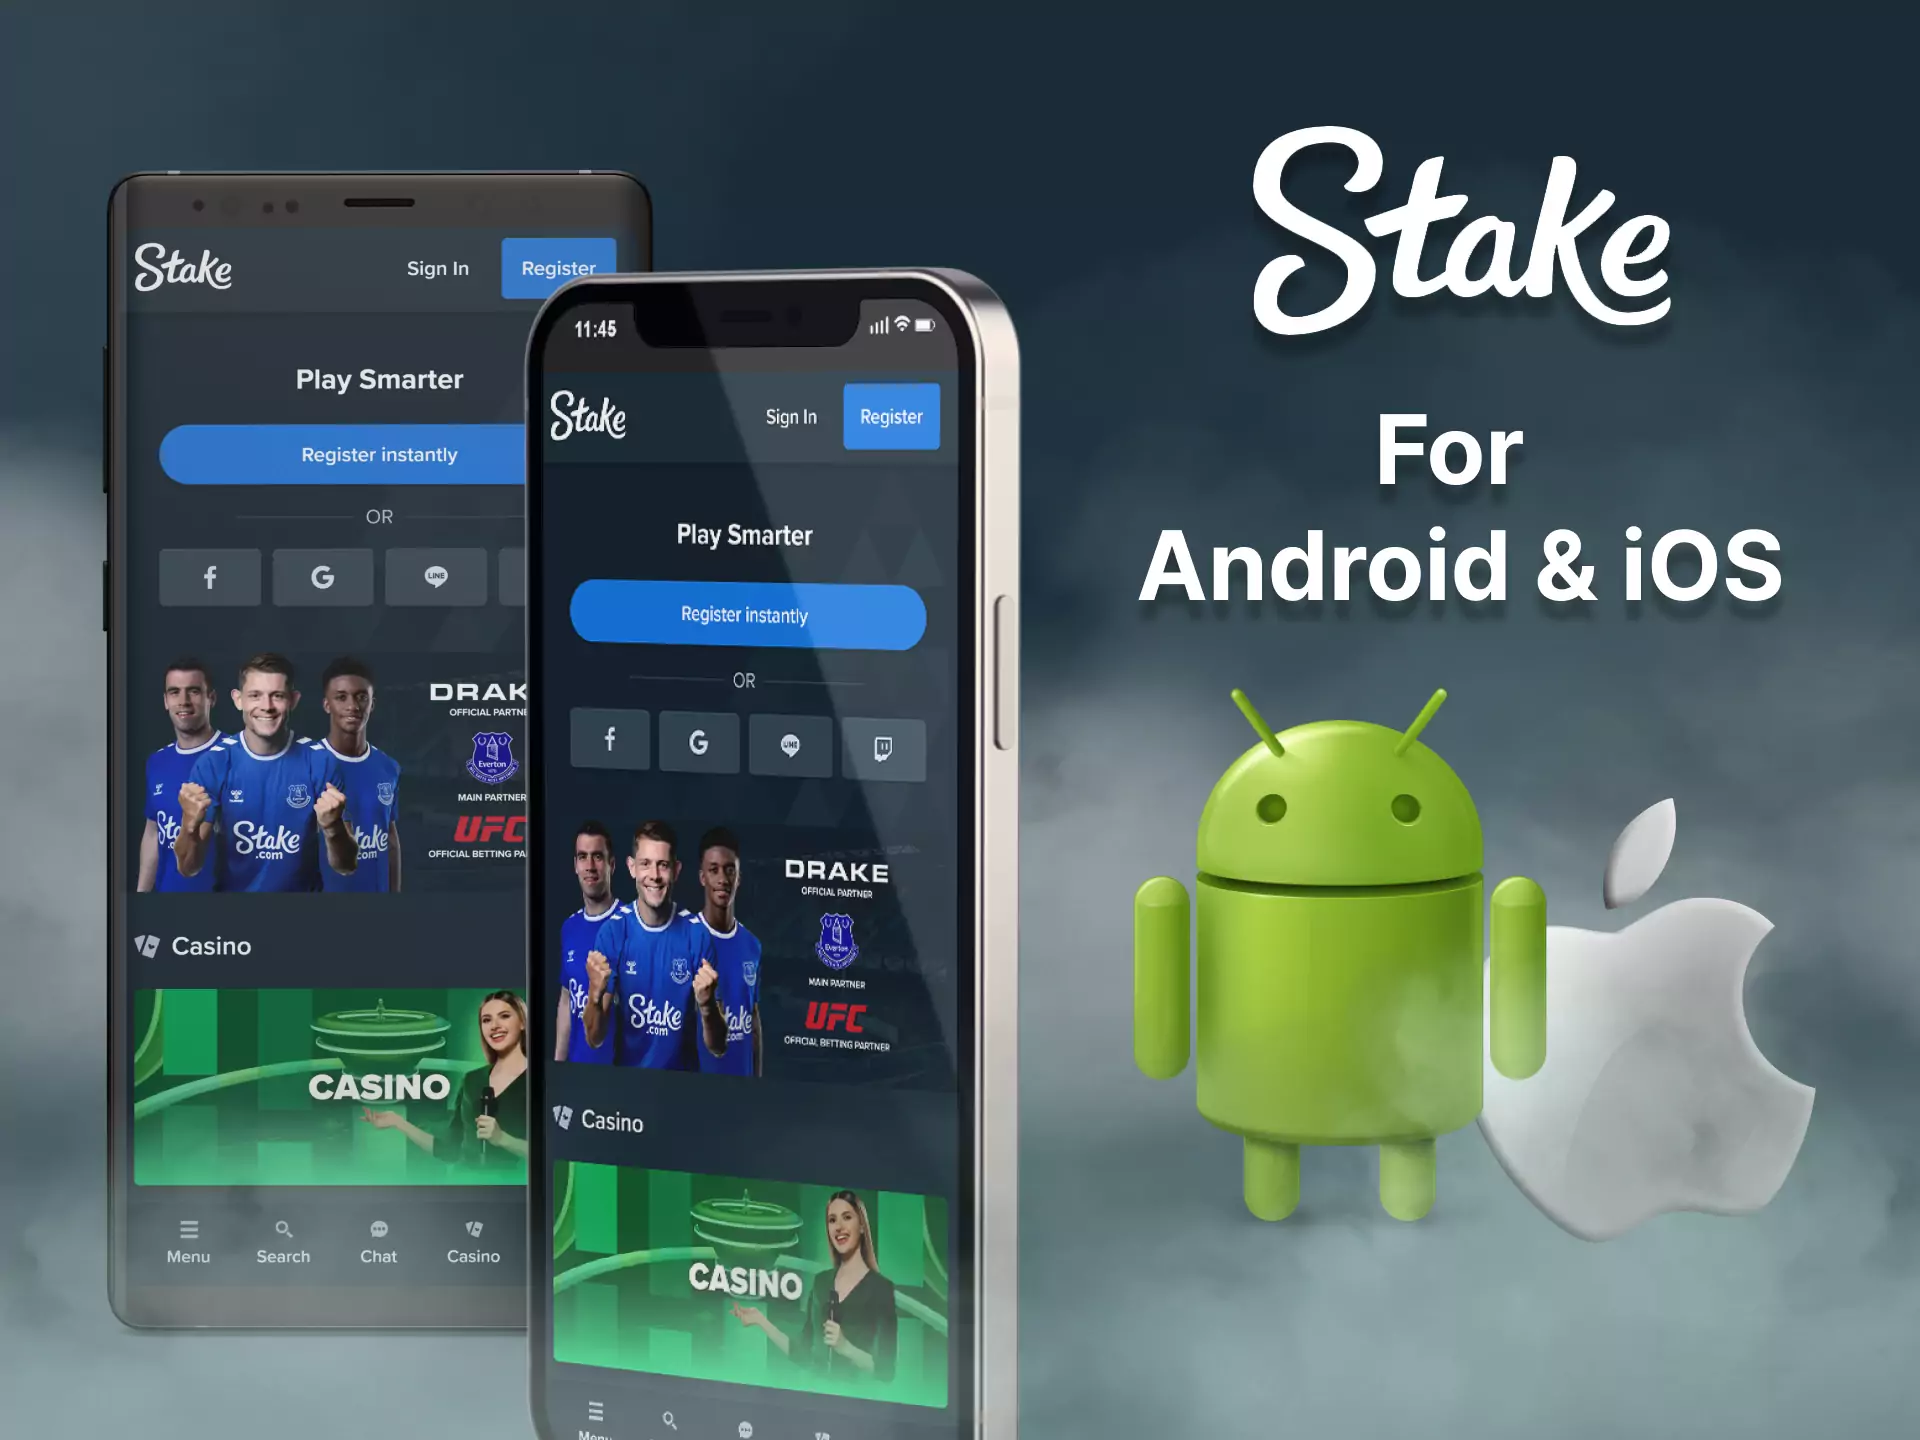 Since the Stake bookmaker doesn't have a mobile app yet, you can use the browser version on your device.